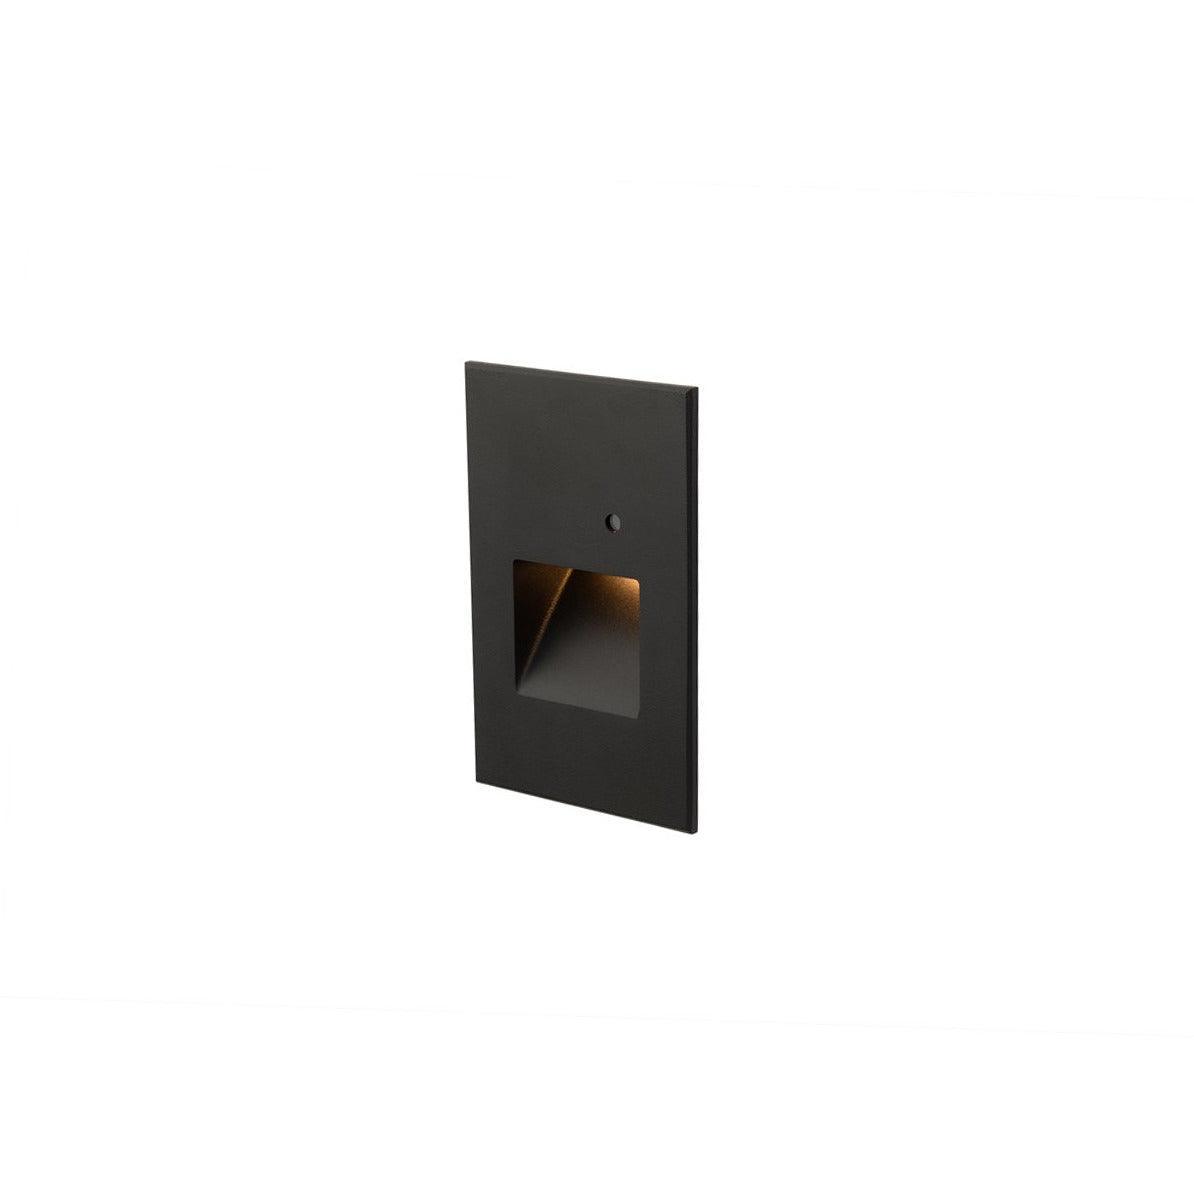 WAC Lighting - Step Light With Photocell Vertical LED Step and Wall Light - WL-LED202-AM-BK | Montreal Lighting & Hardware